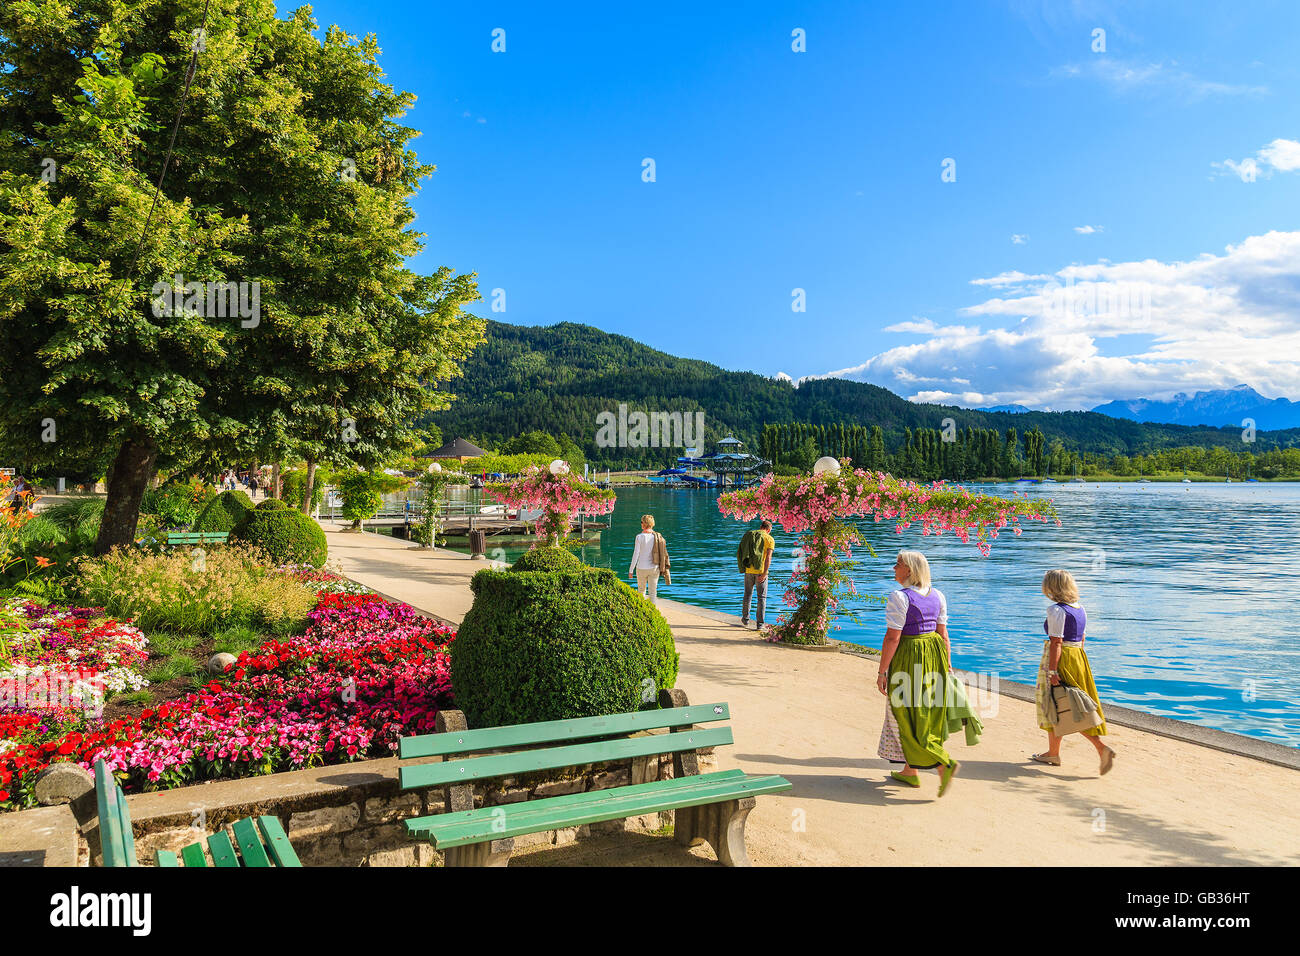 WORTHERSEE LAKE, AUSTRIA - JUN 20, 2015: two women wearing traditional clothes walking along Worthersee lake shore during summer Stock Photo